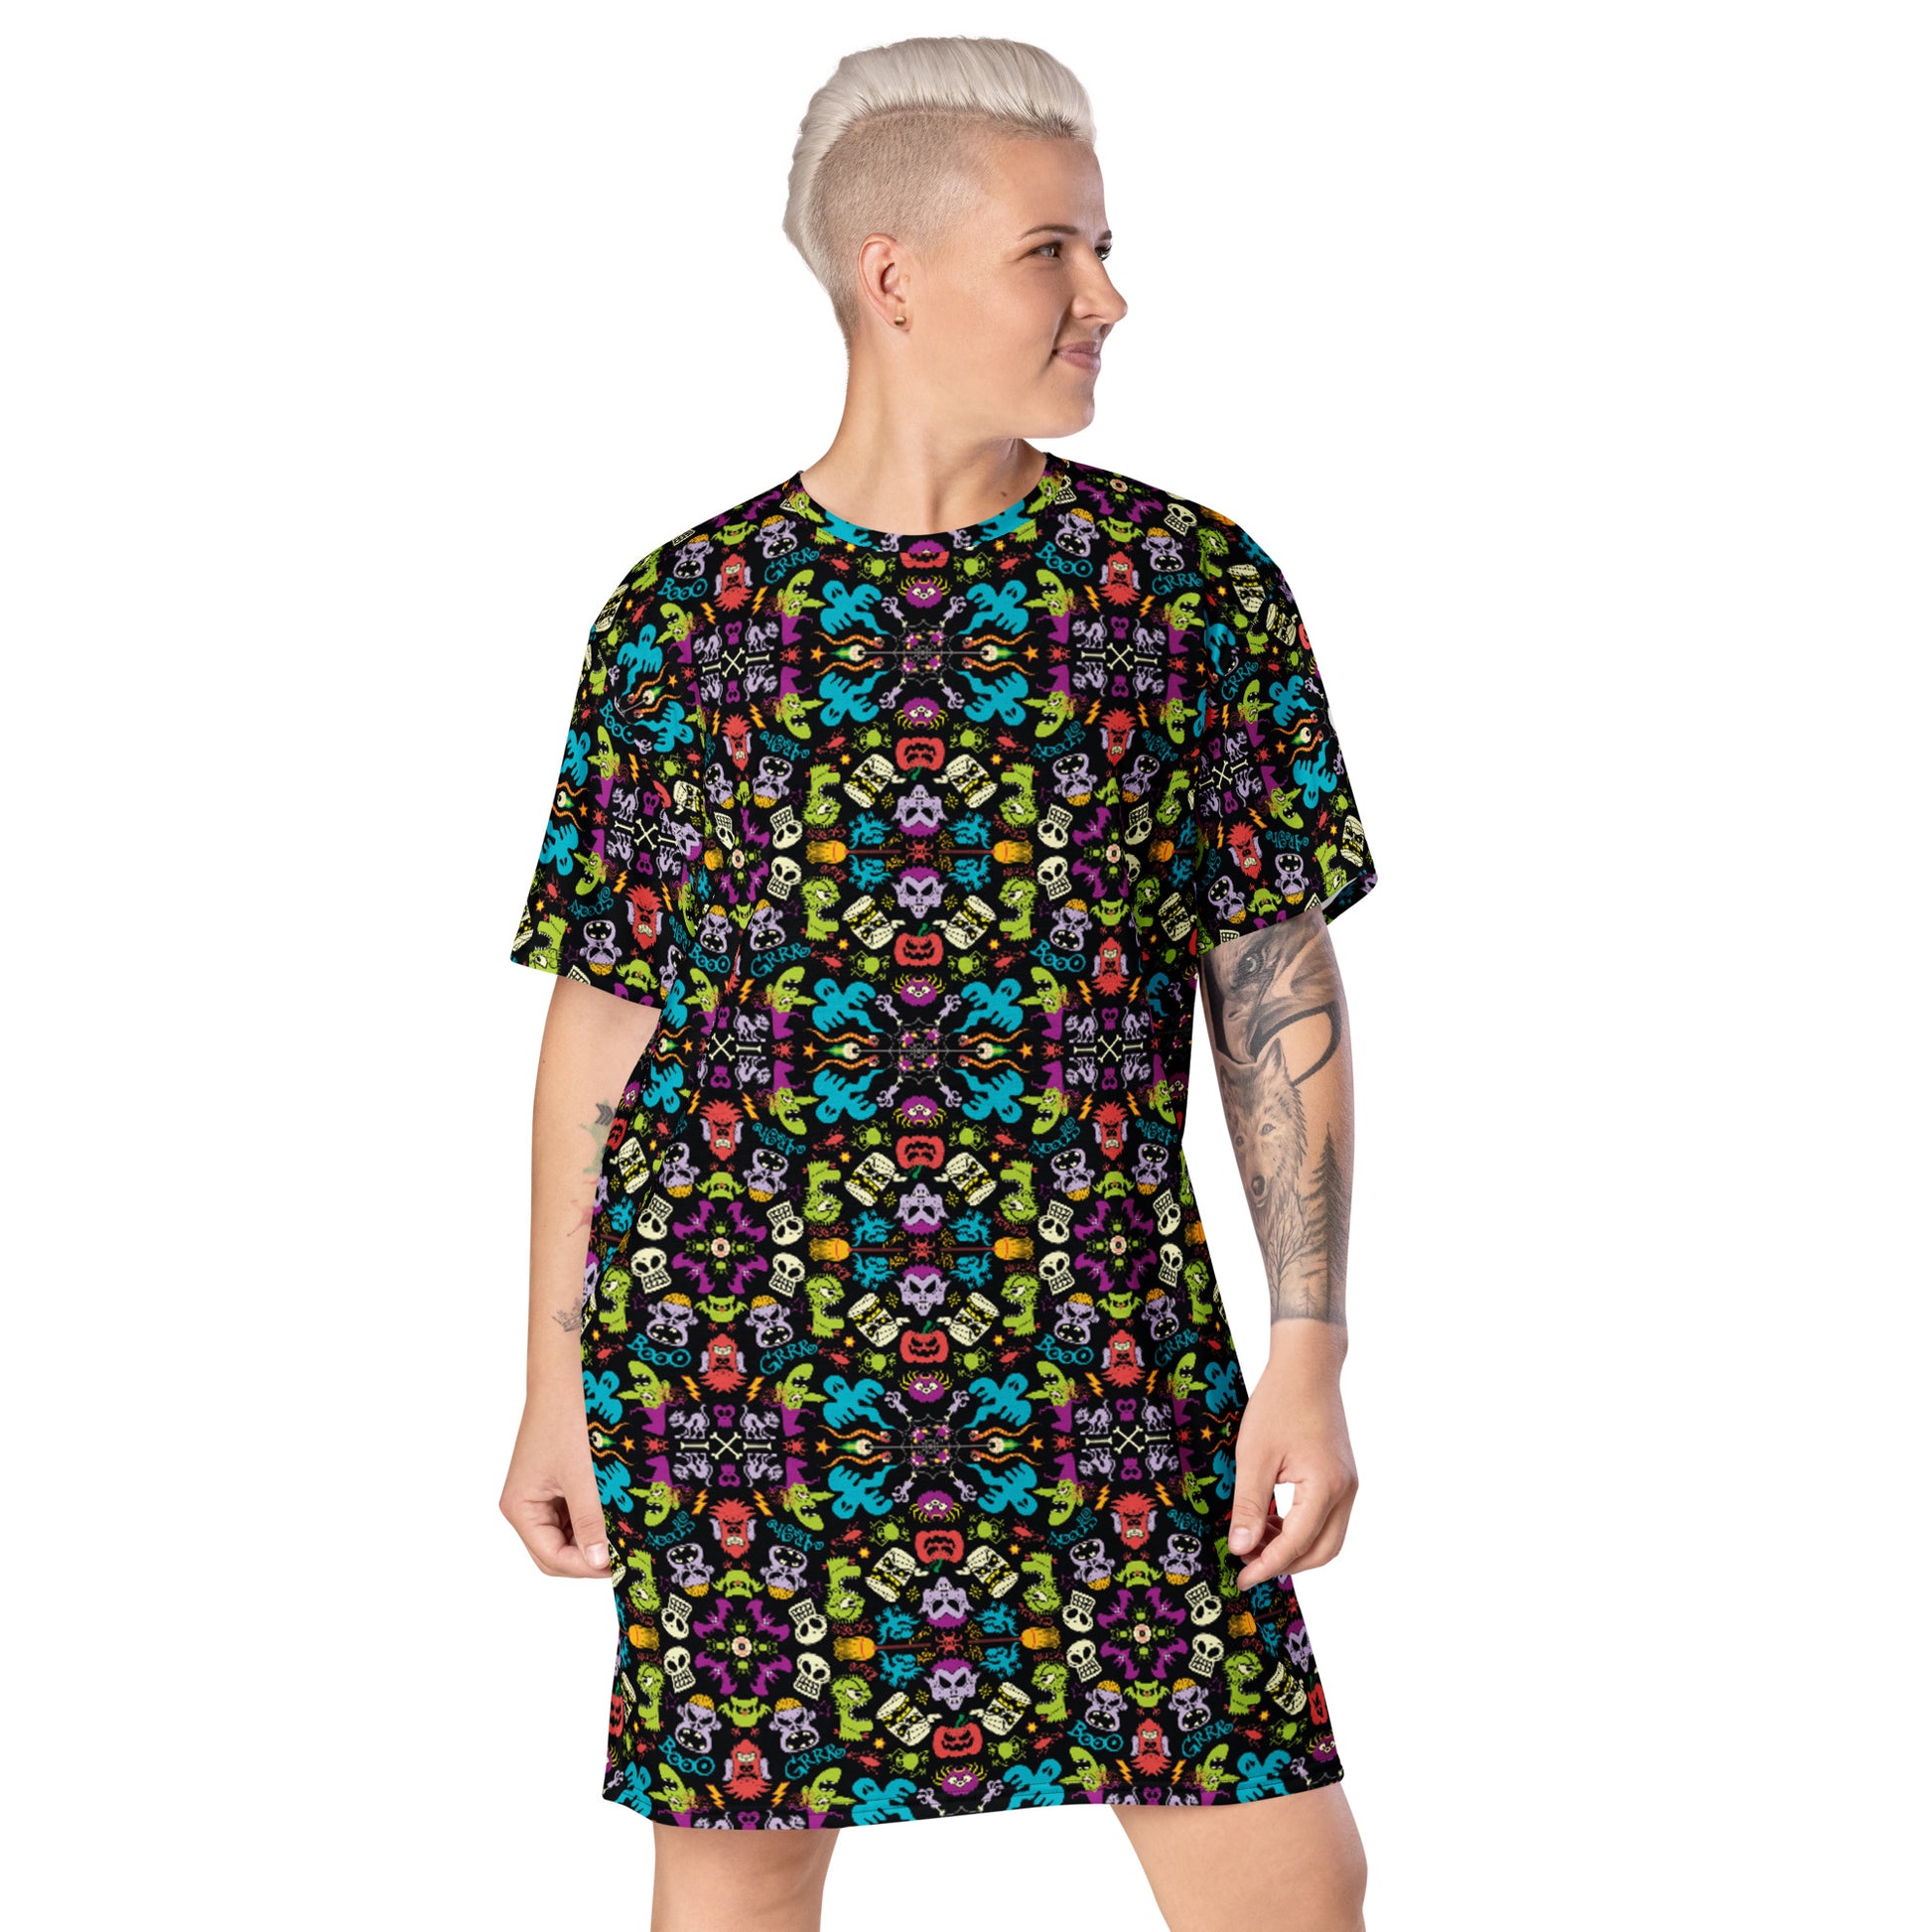 Spooky Halloween characters in a pattern design T-shirt dress. Front view